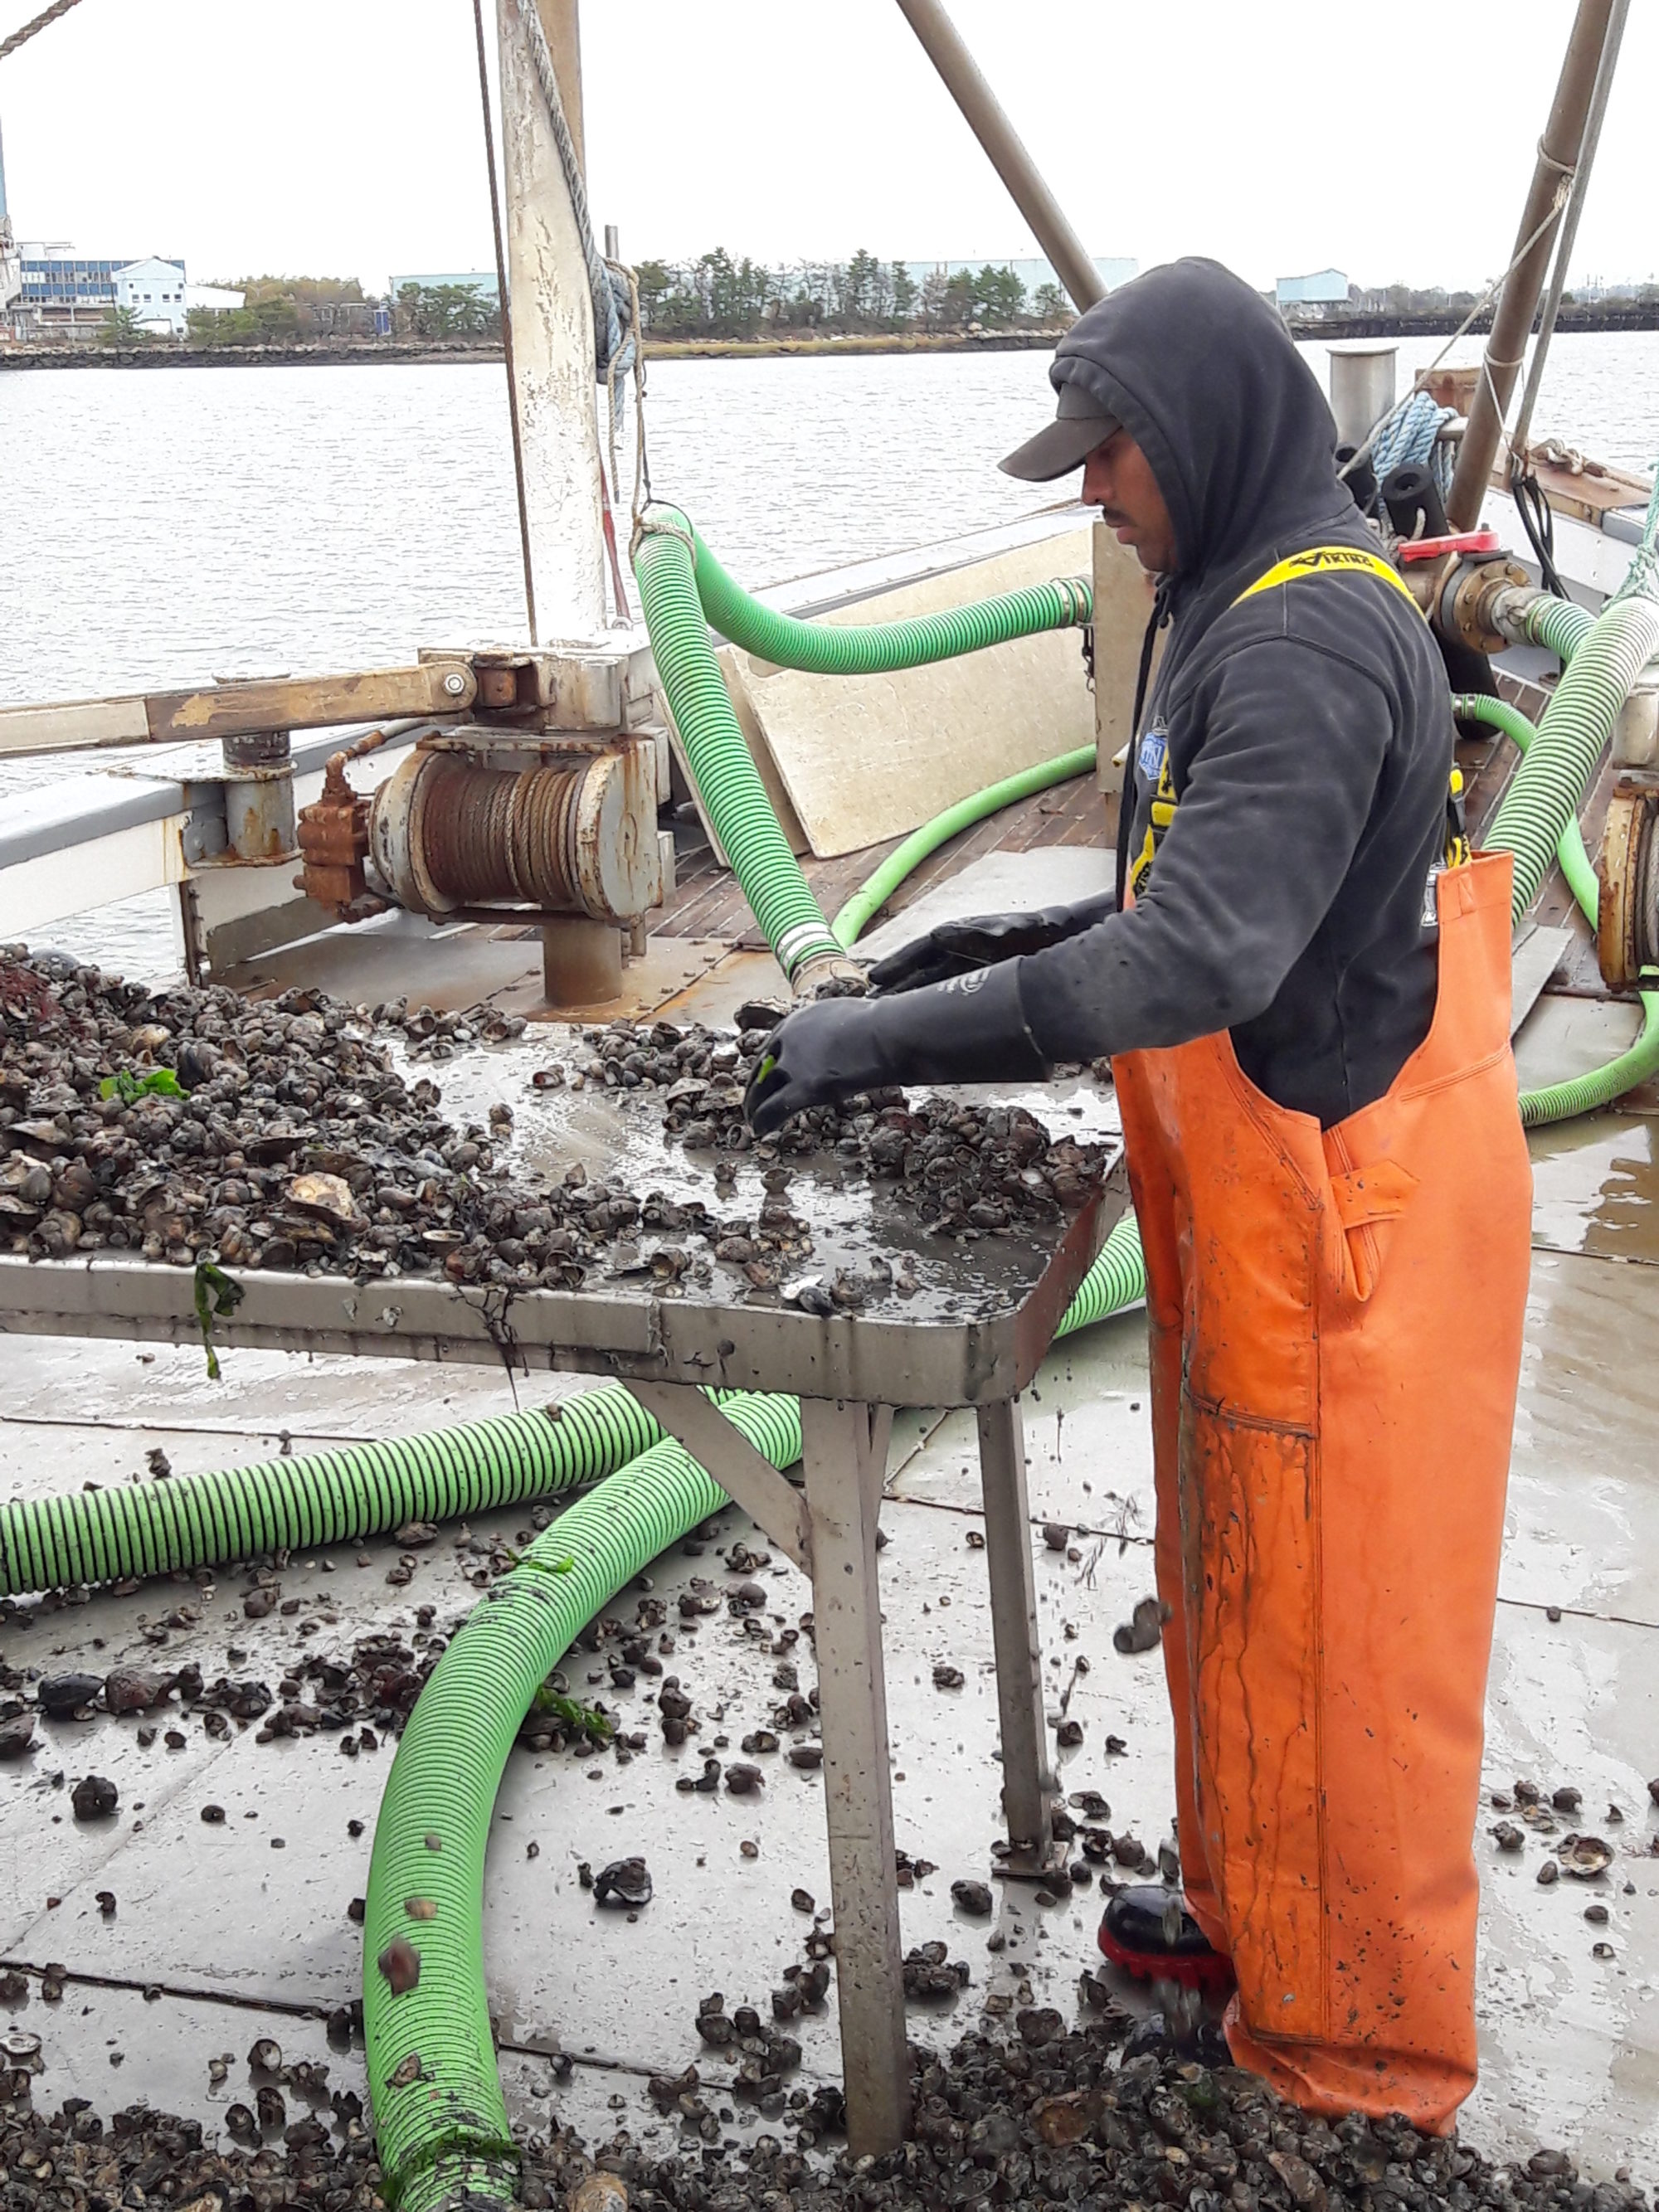 An individual is pictured collecting slipper snails and oysters from Jimmy Bloom’s boat in Norwalk for a previous study.